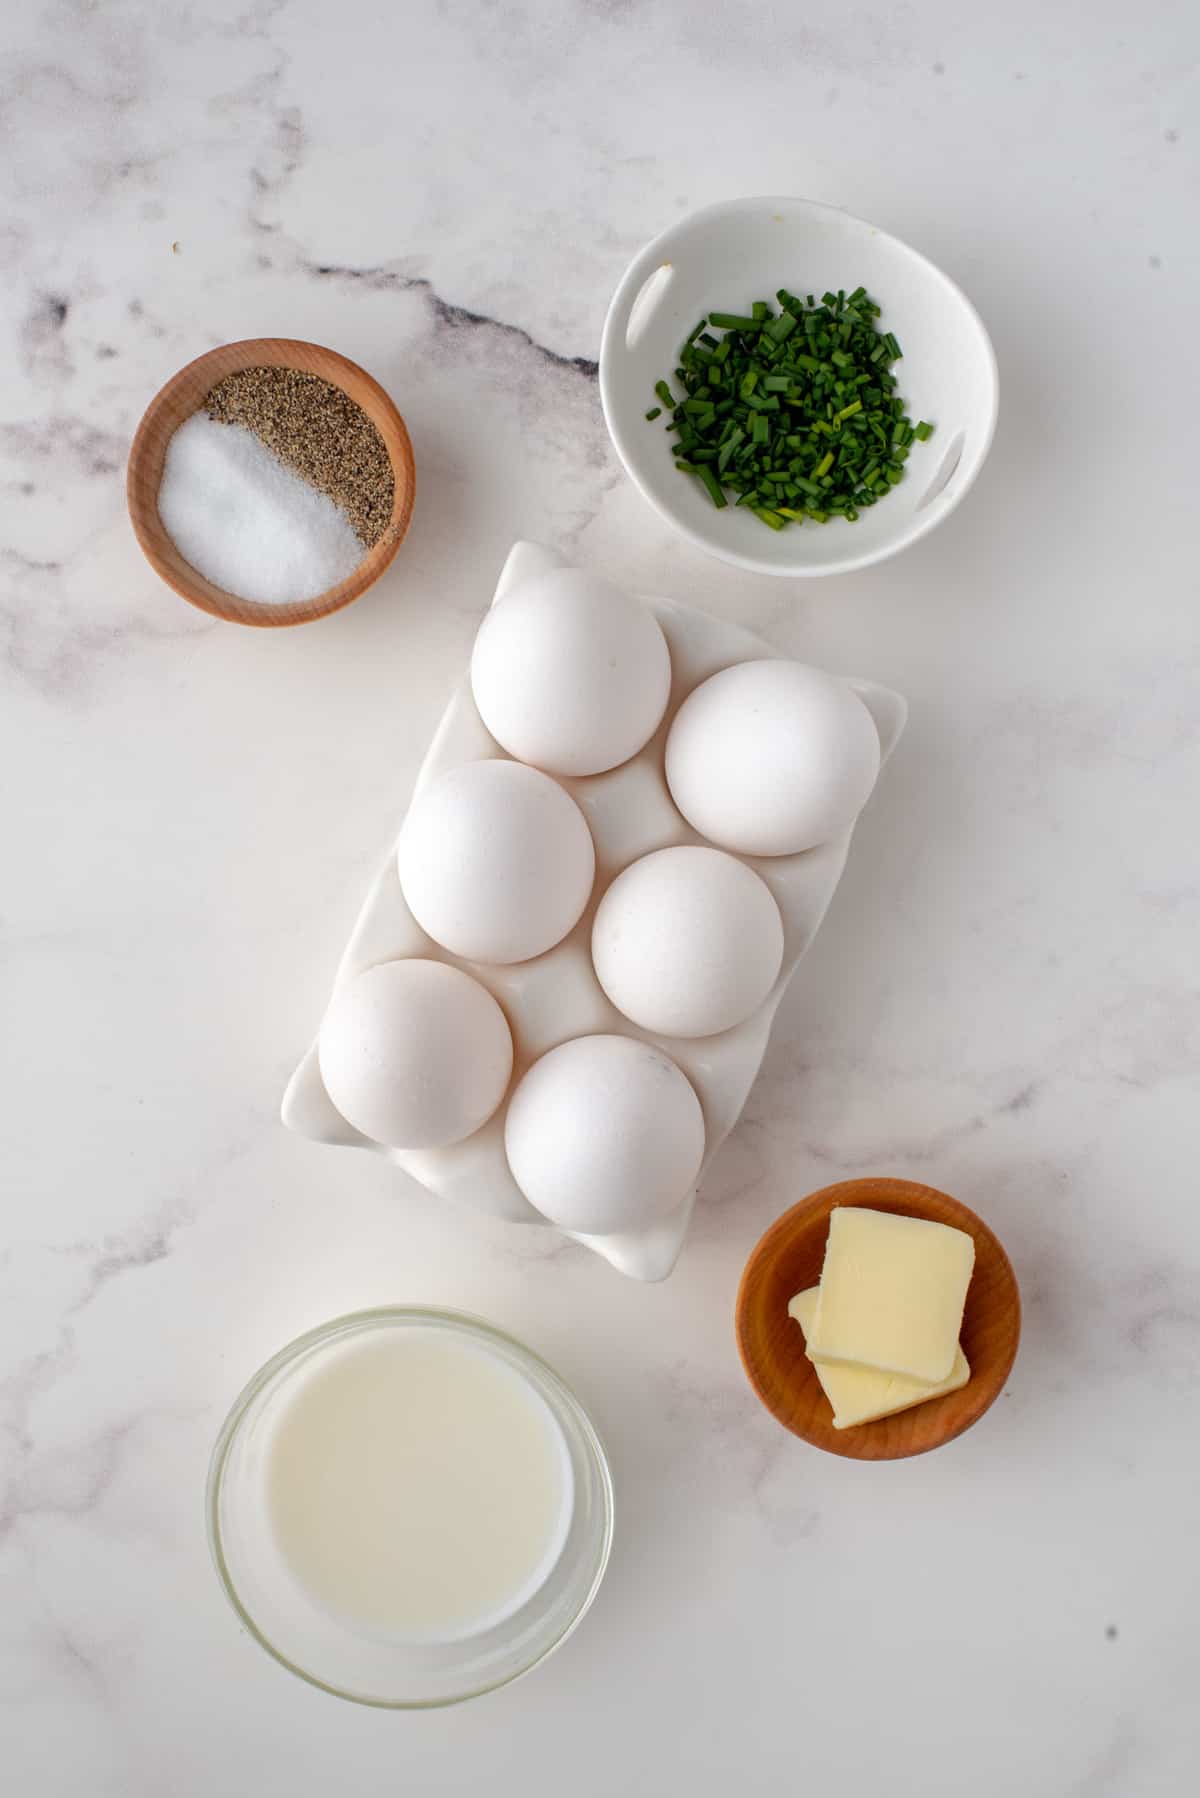 Overhead view of ingredients needed including eggs, butter, chives, milk, salt and pepper.